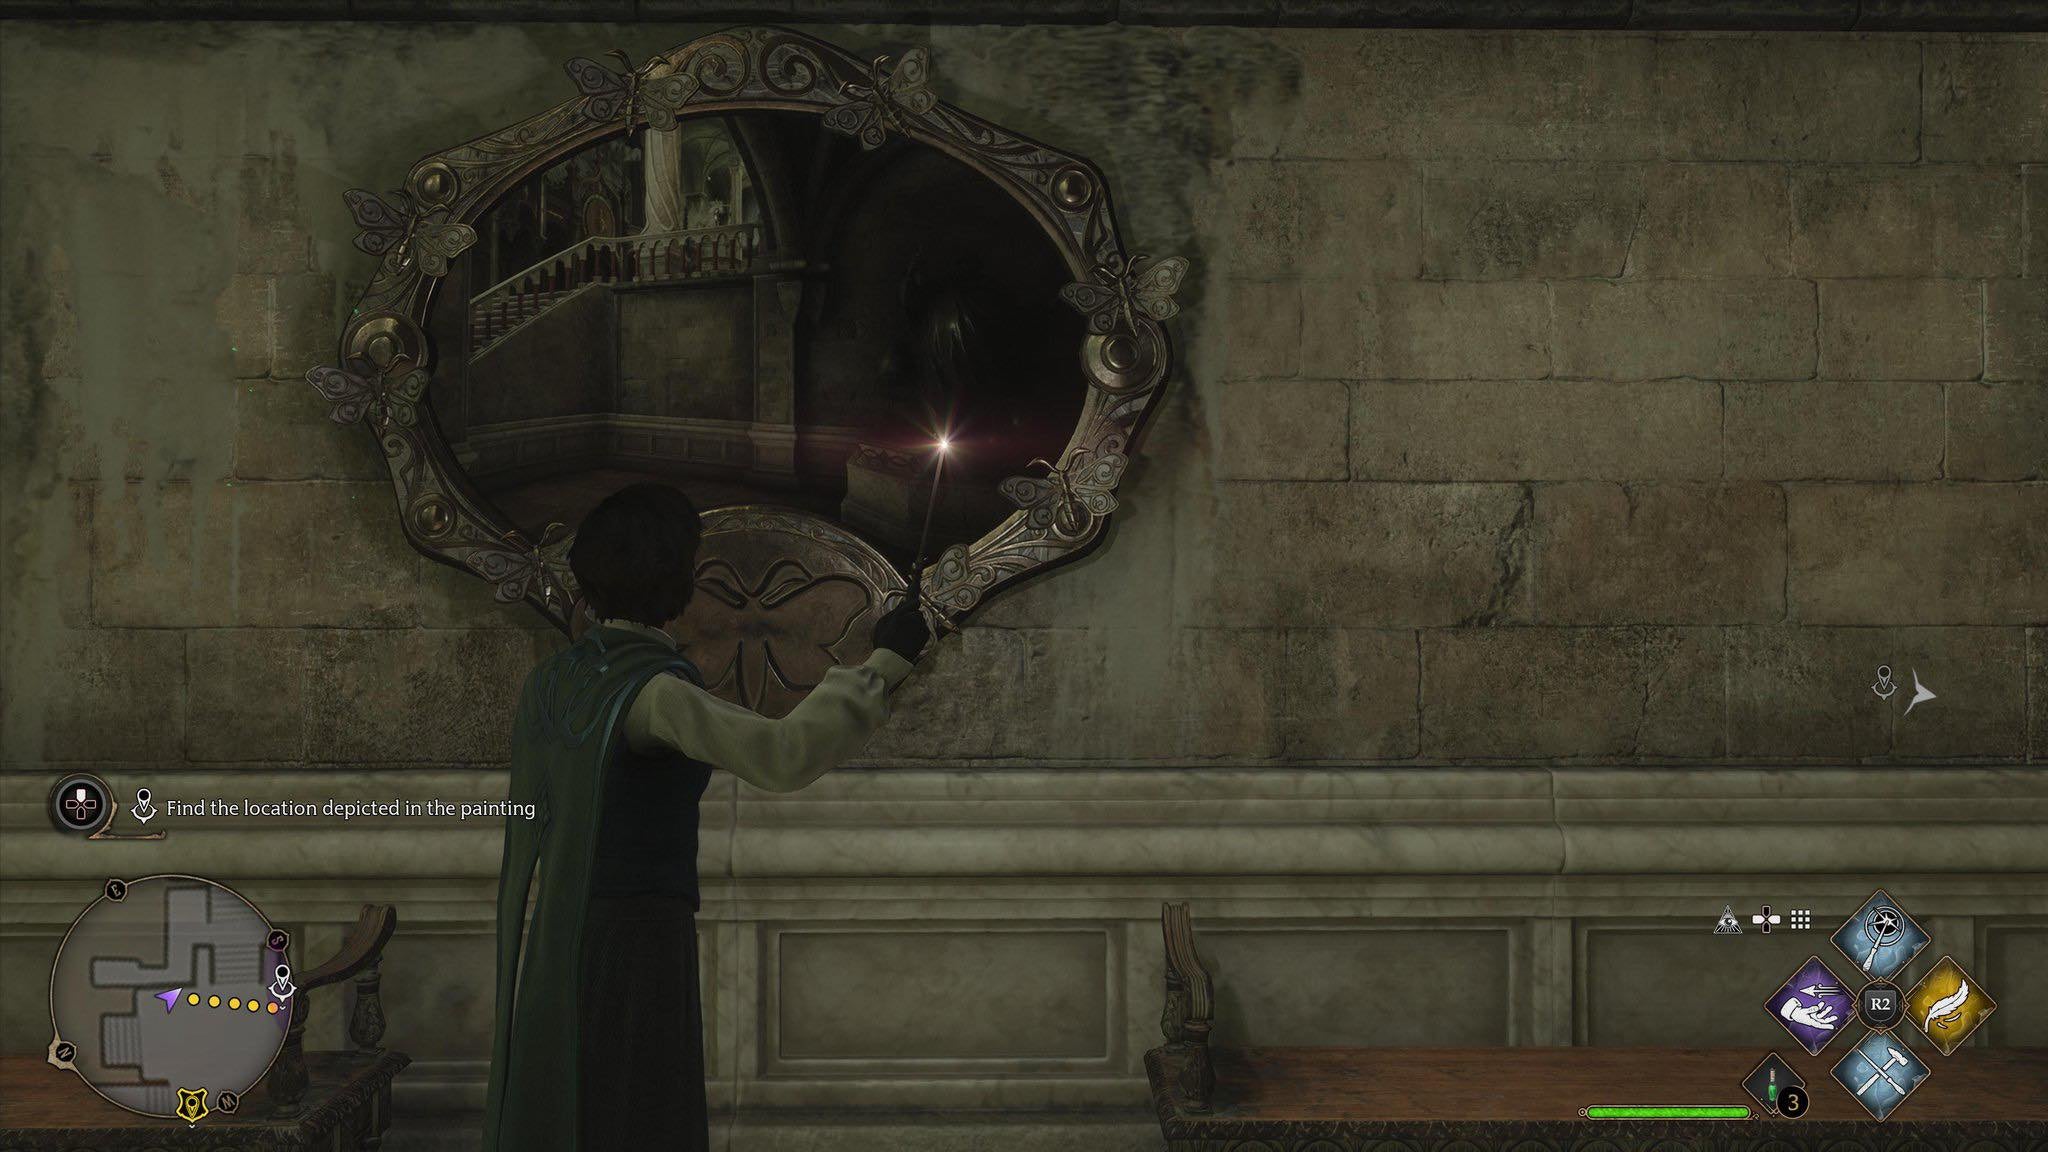 Character casting Lumos in front of the Moth Mirror.